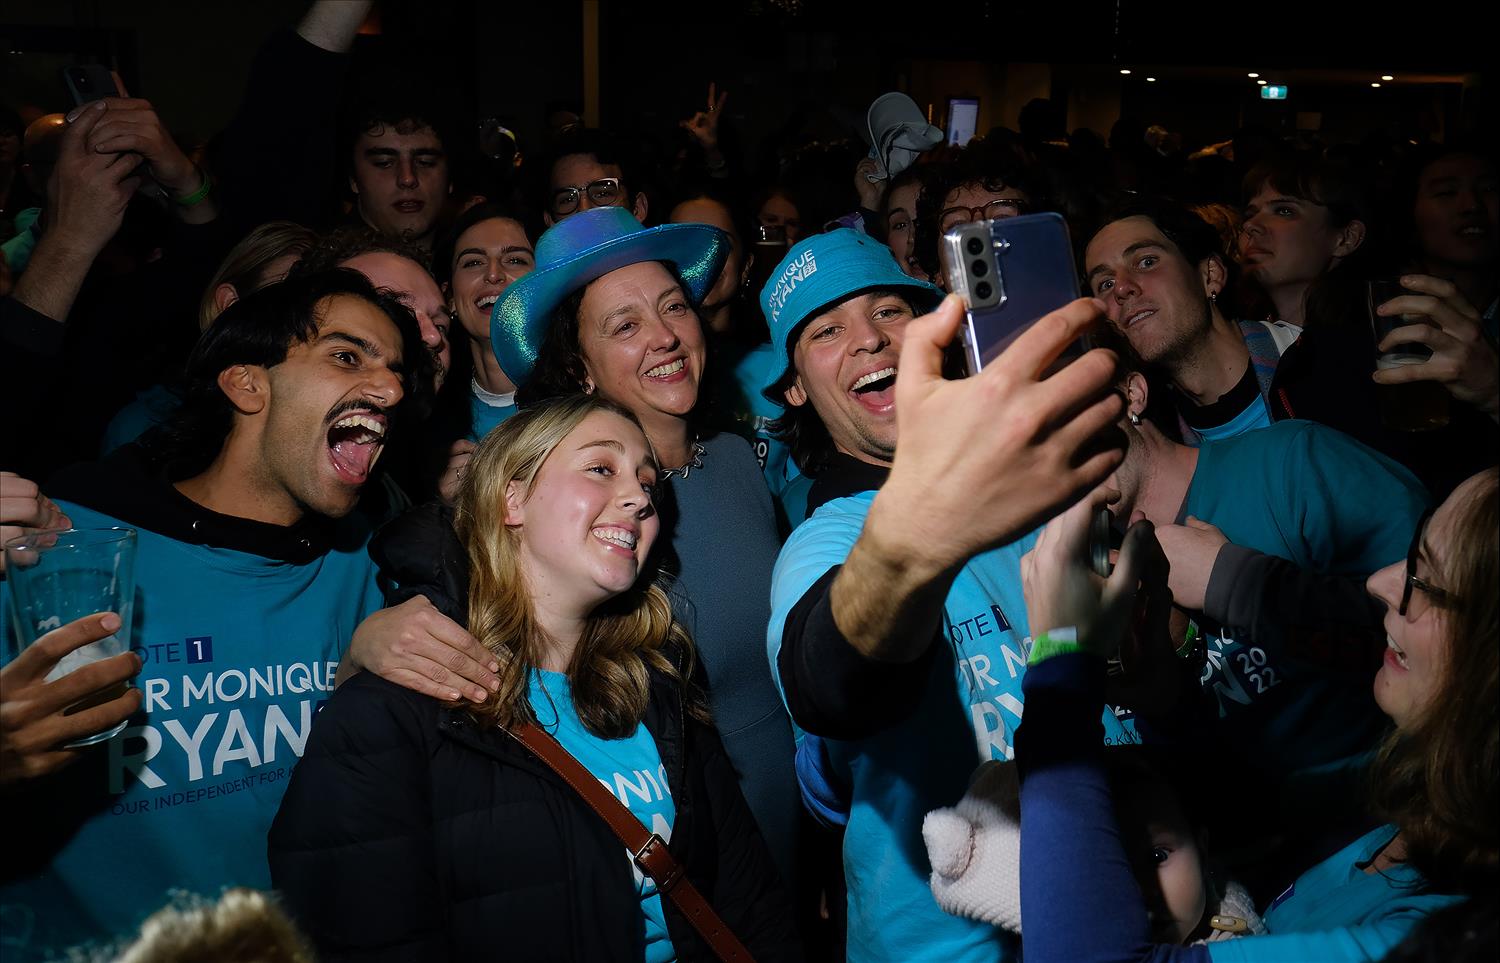 Will The Teal Independents Be Disruptors In Victorian Politics?